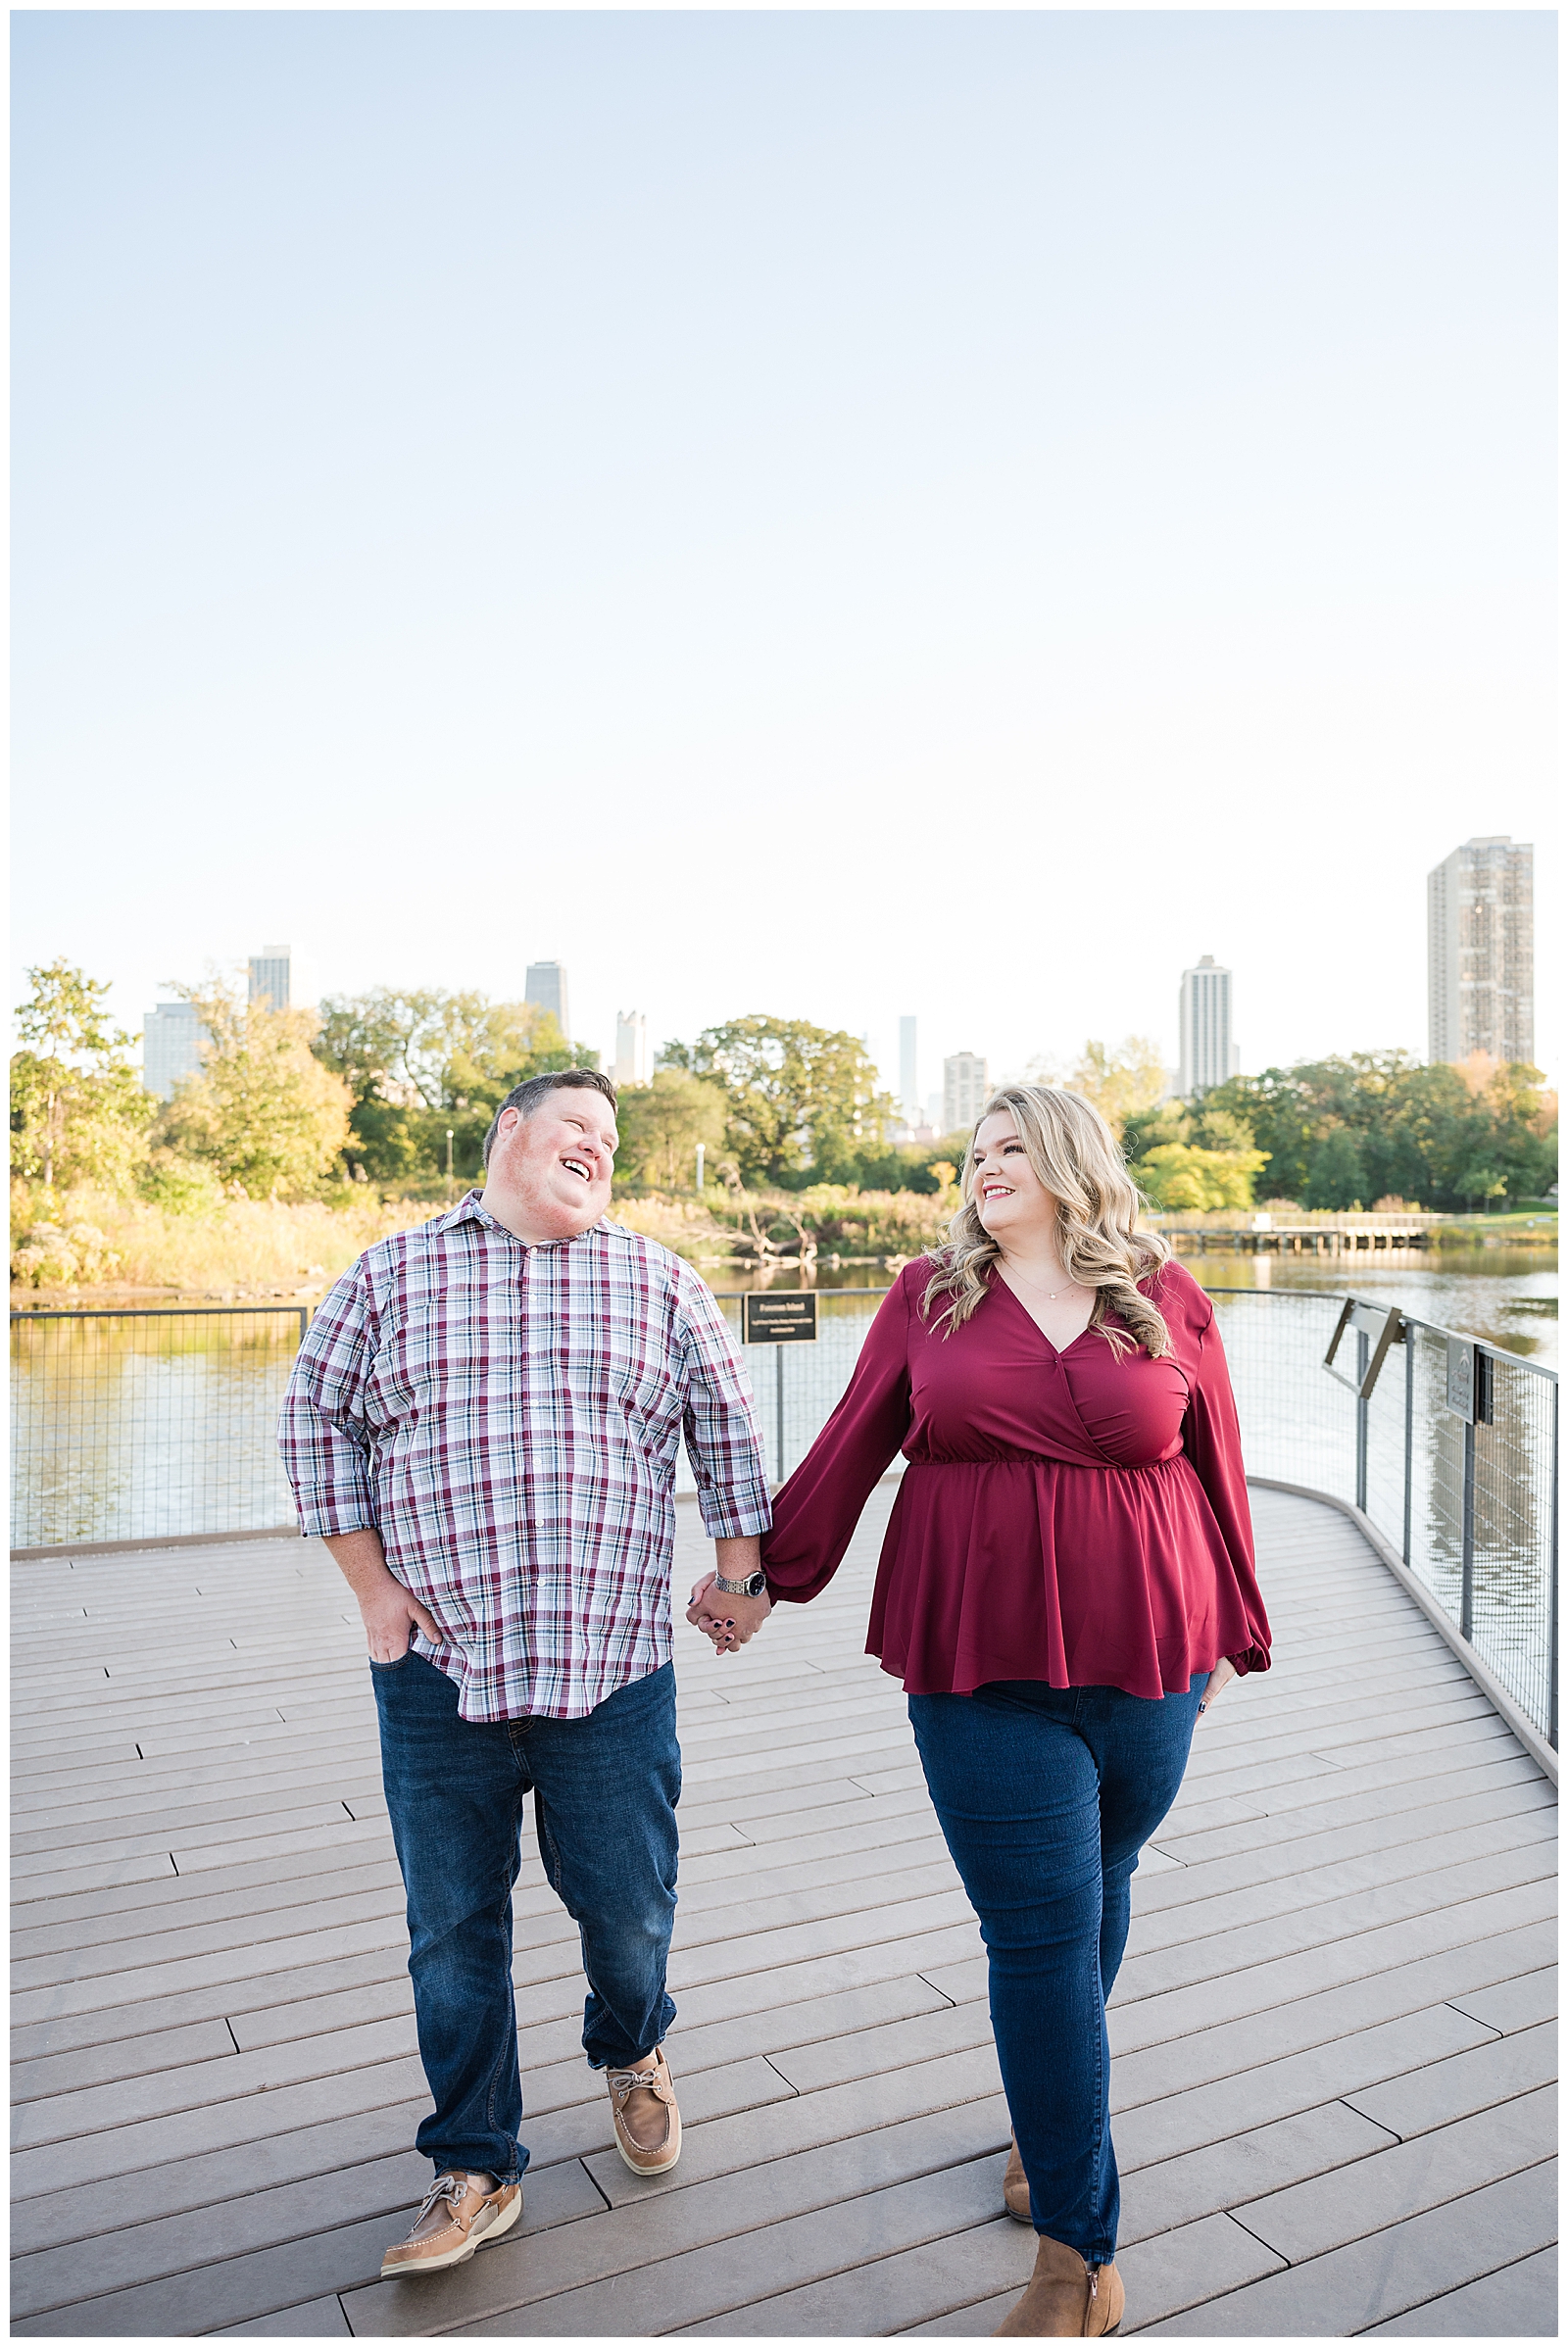 Sunset Engagement session at Lincoln park, Chicago